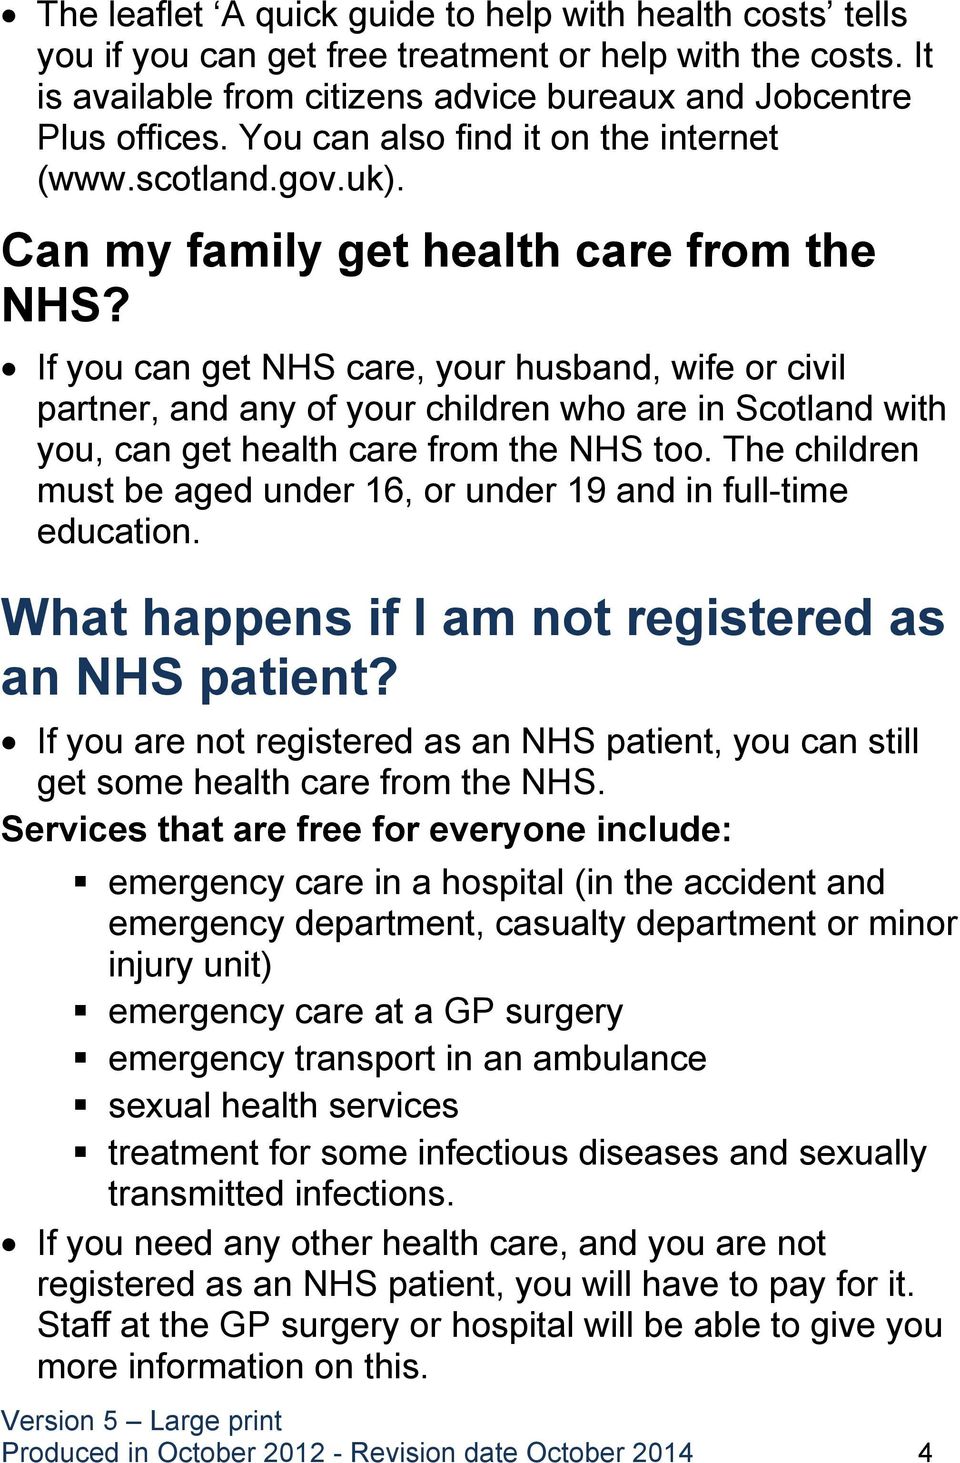 If you can get NHS care, your husband, wife or civil partner, and any of your children who are in Scotland with you, can get health care from the NHS too.